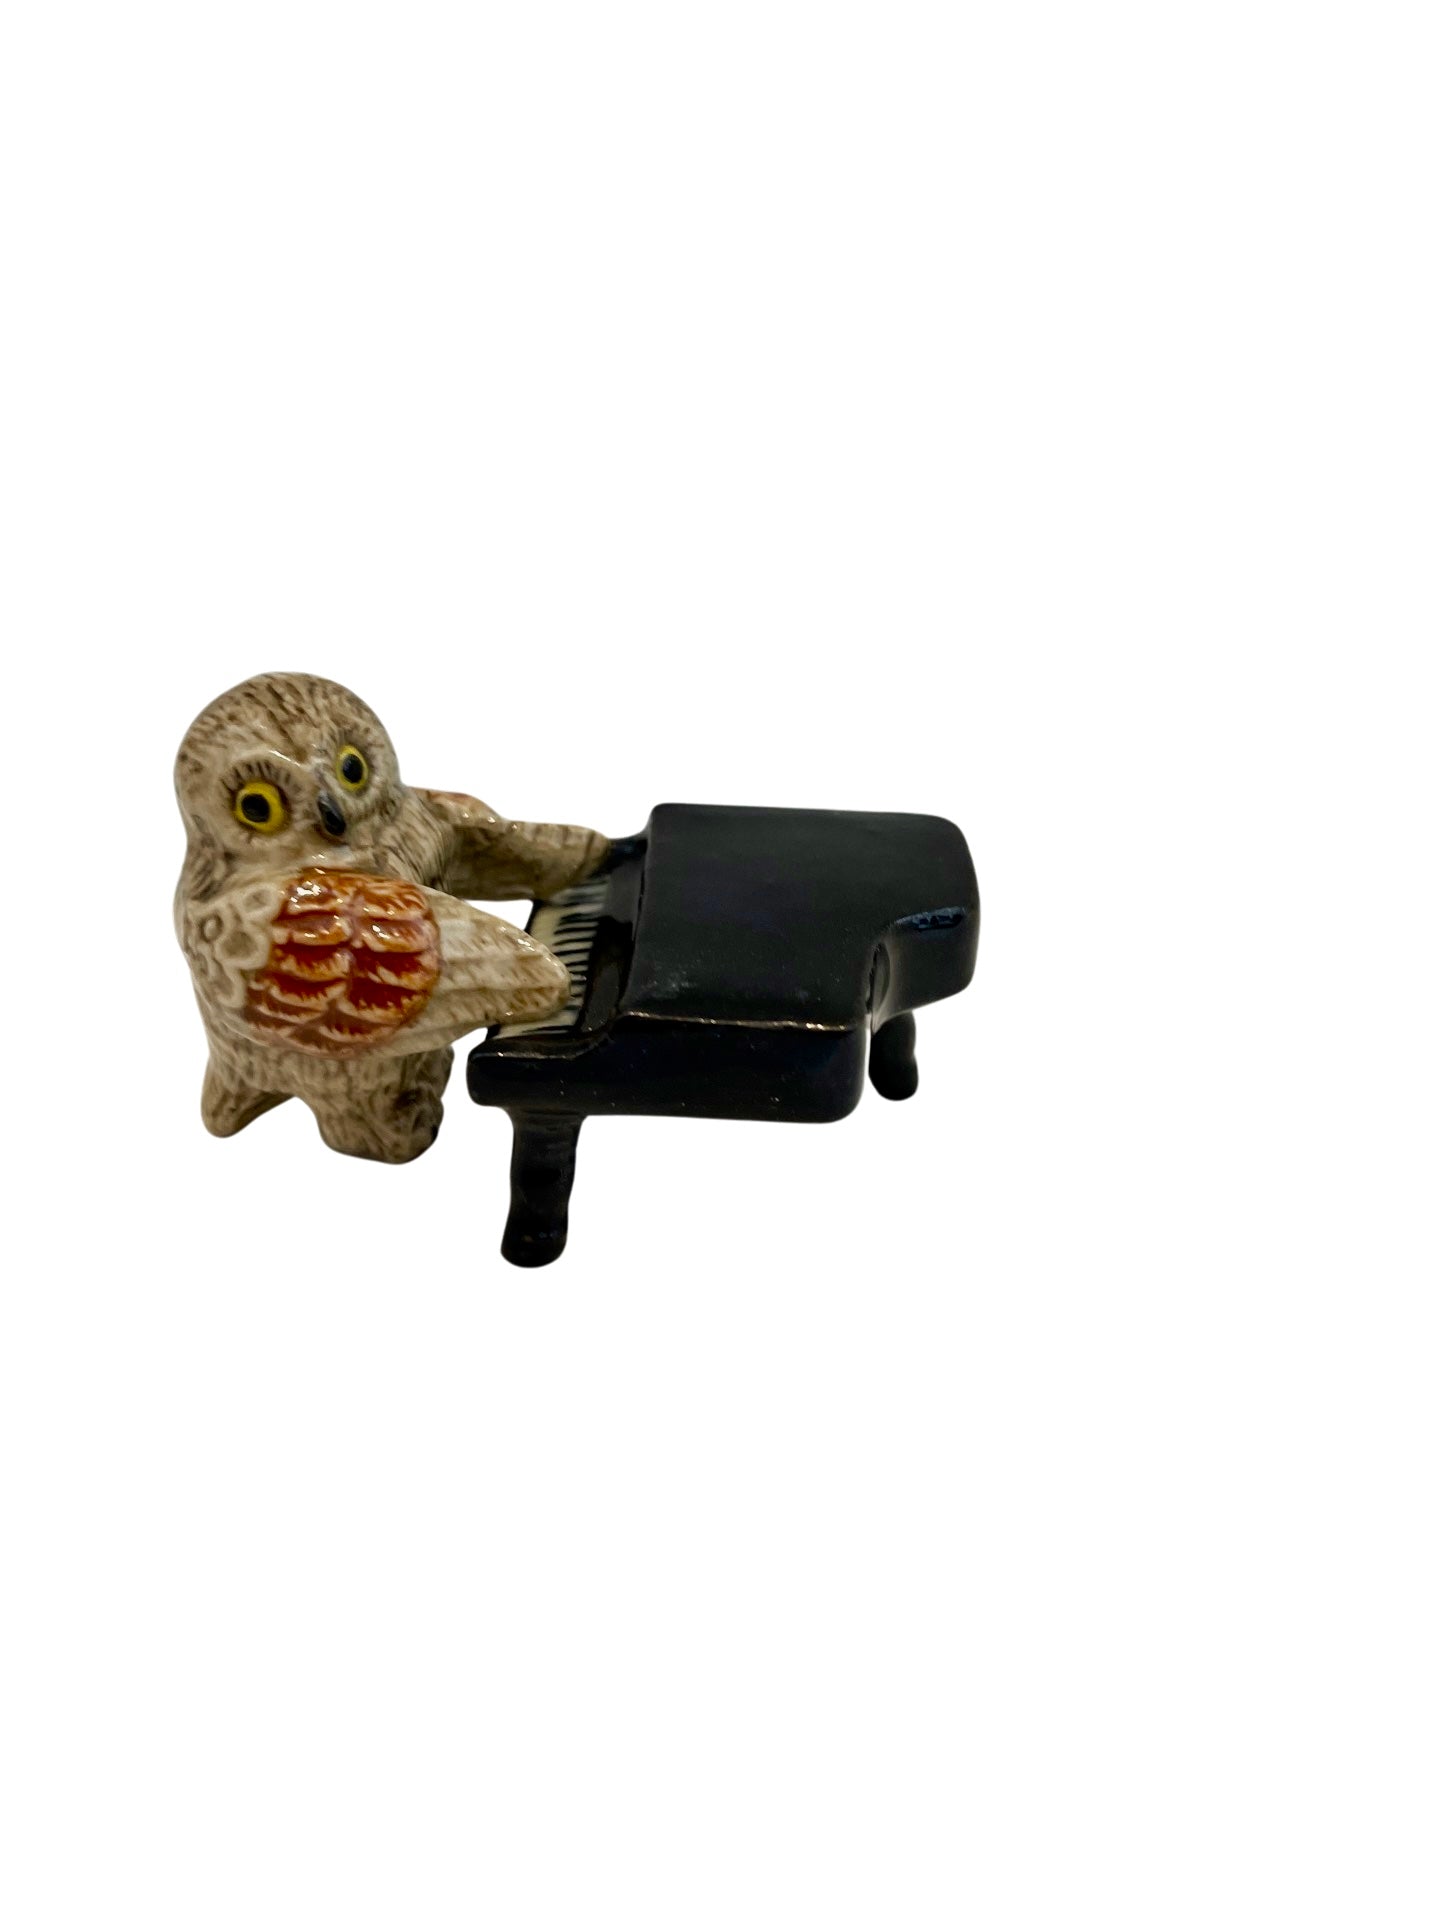 Porcelain Figurine Owl Playing the Piano